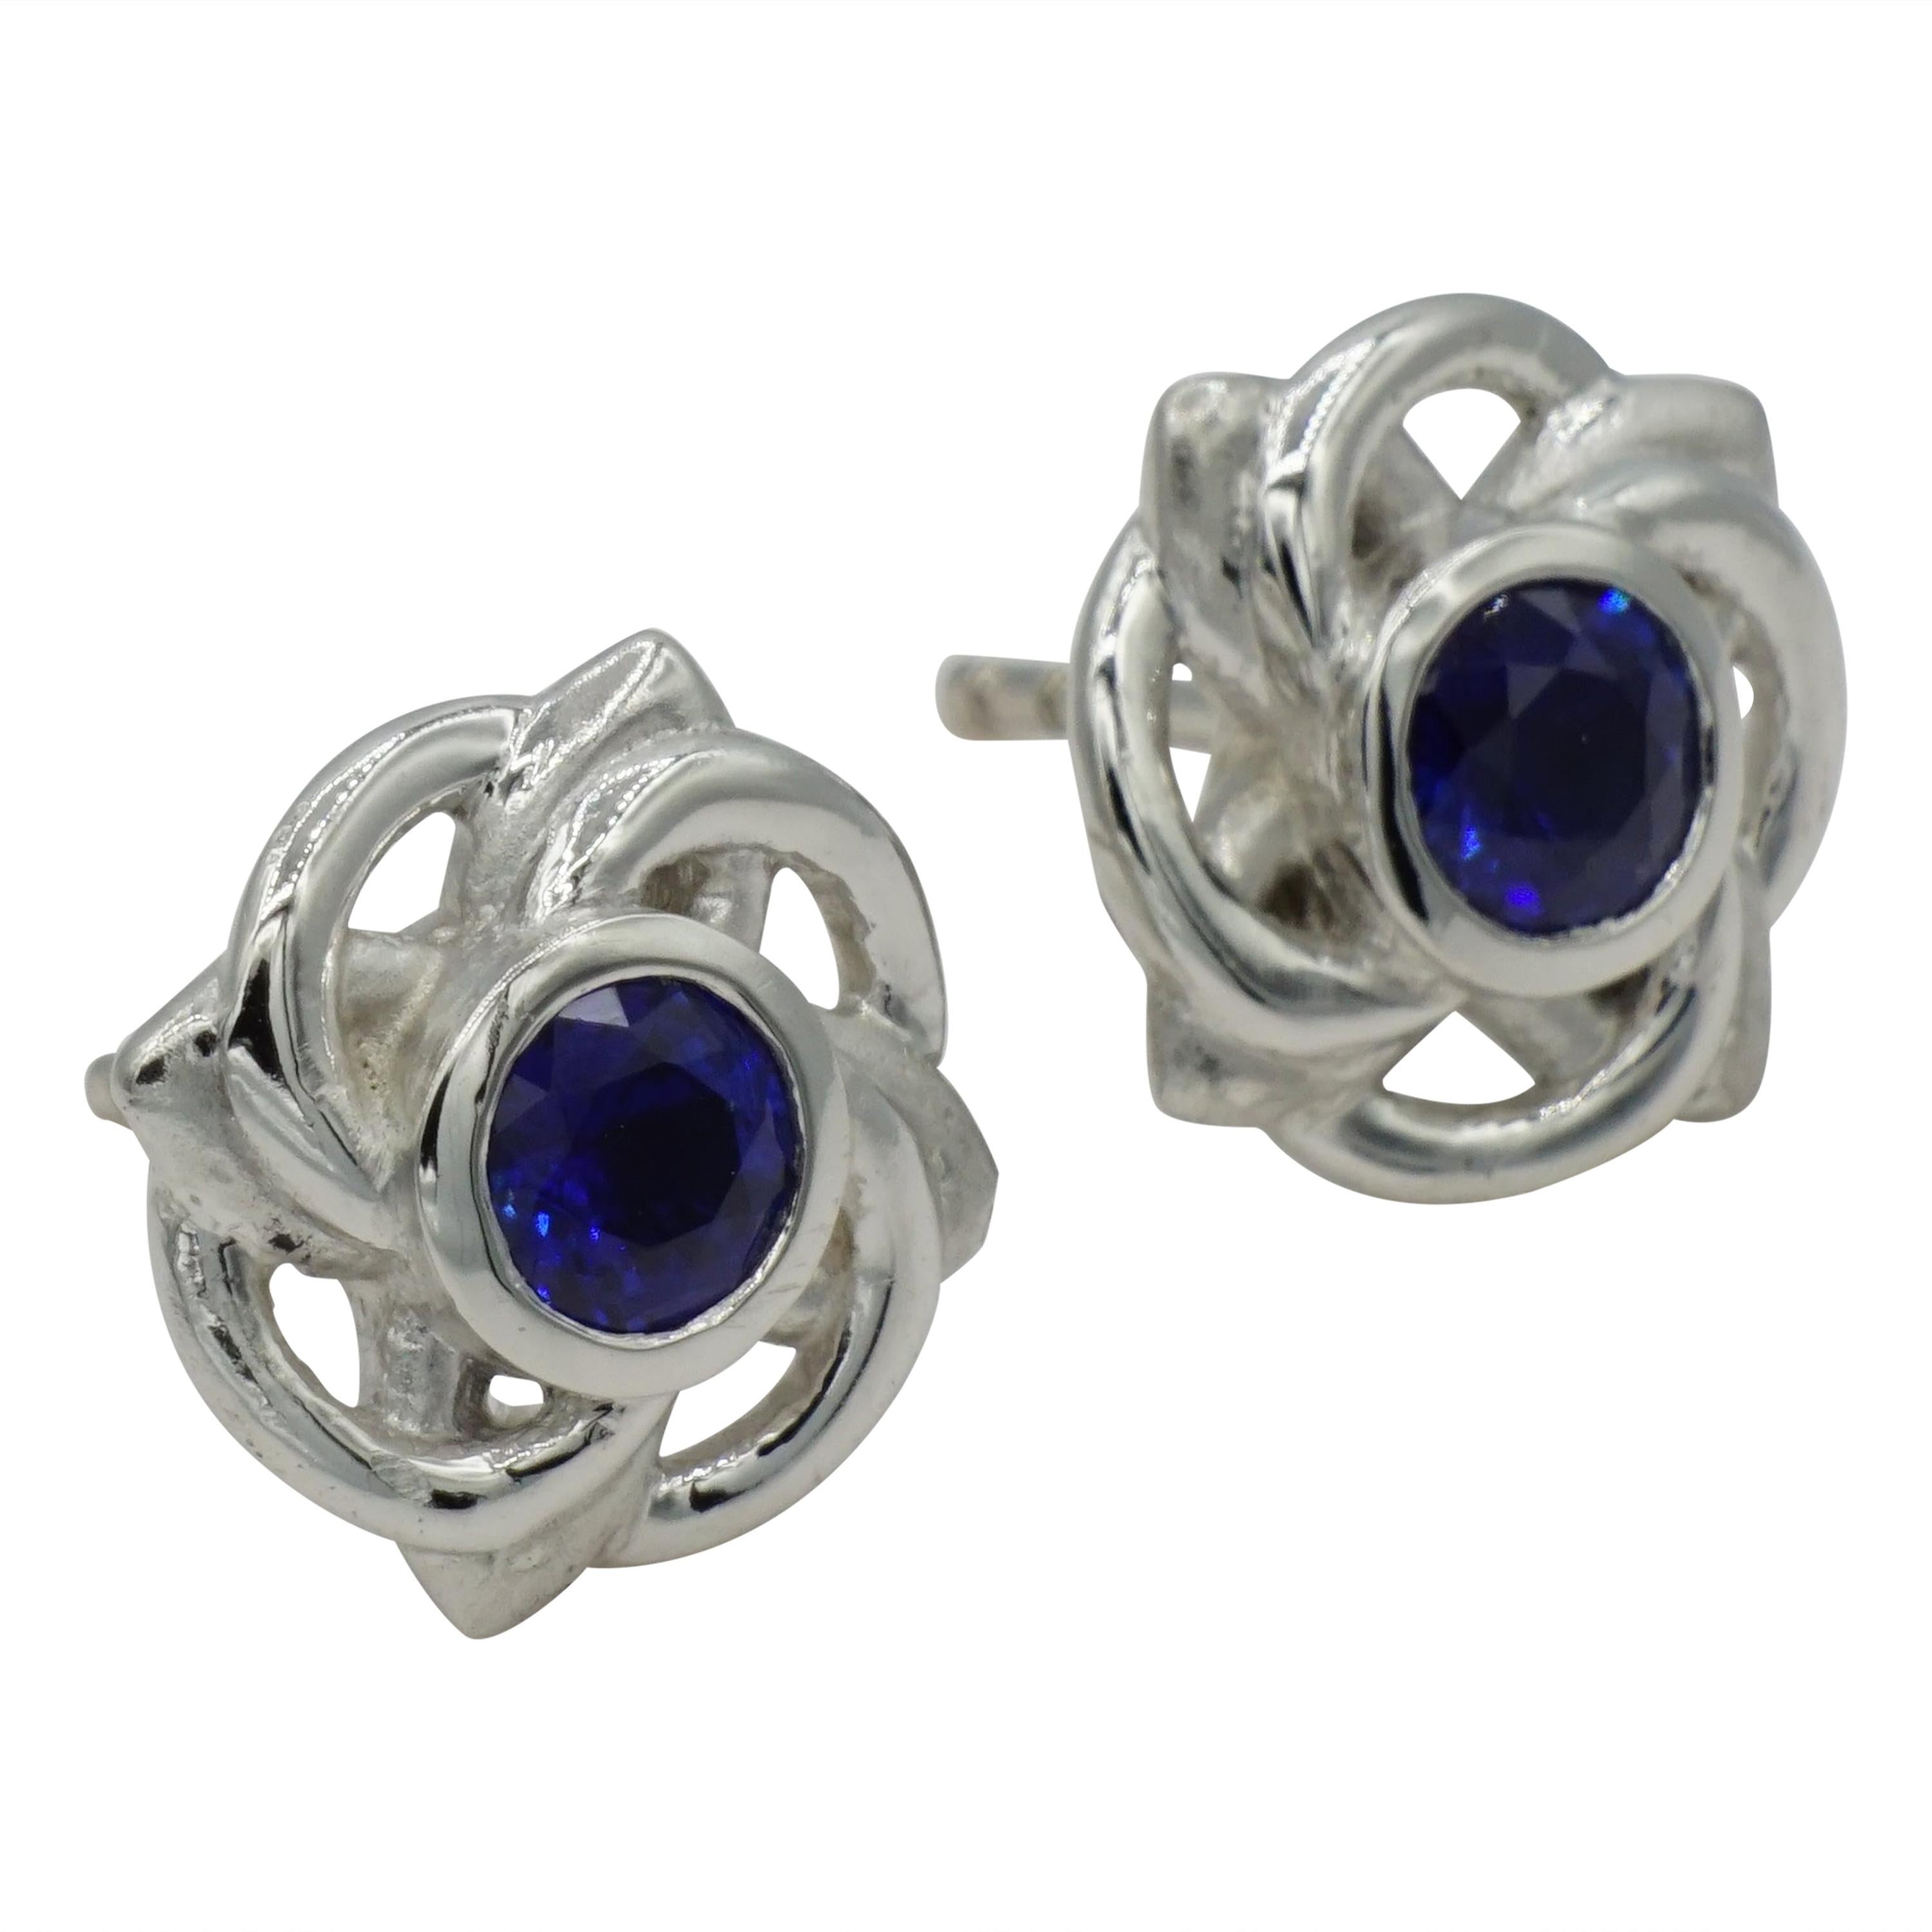 Platinum Celtic Knot Round Fine Ceylon Sapphire Earrings by Rock N Gold For Sale